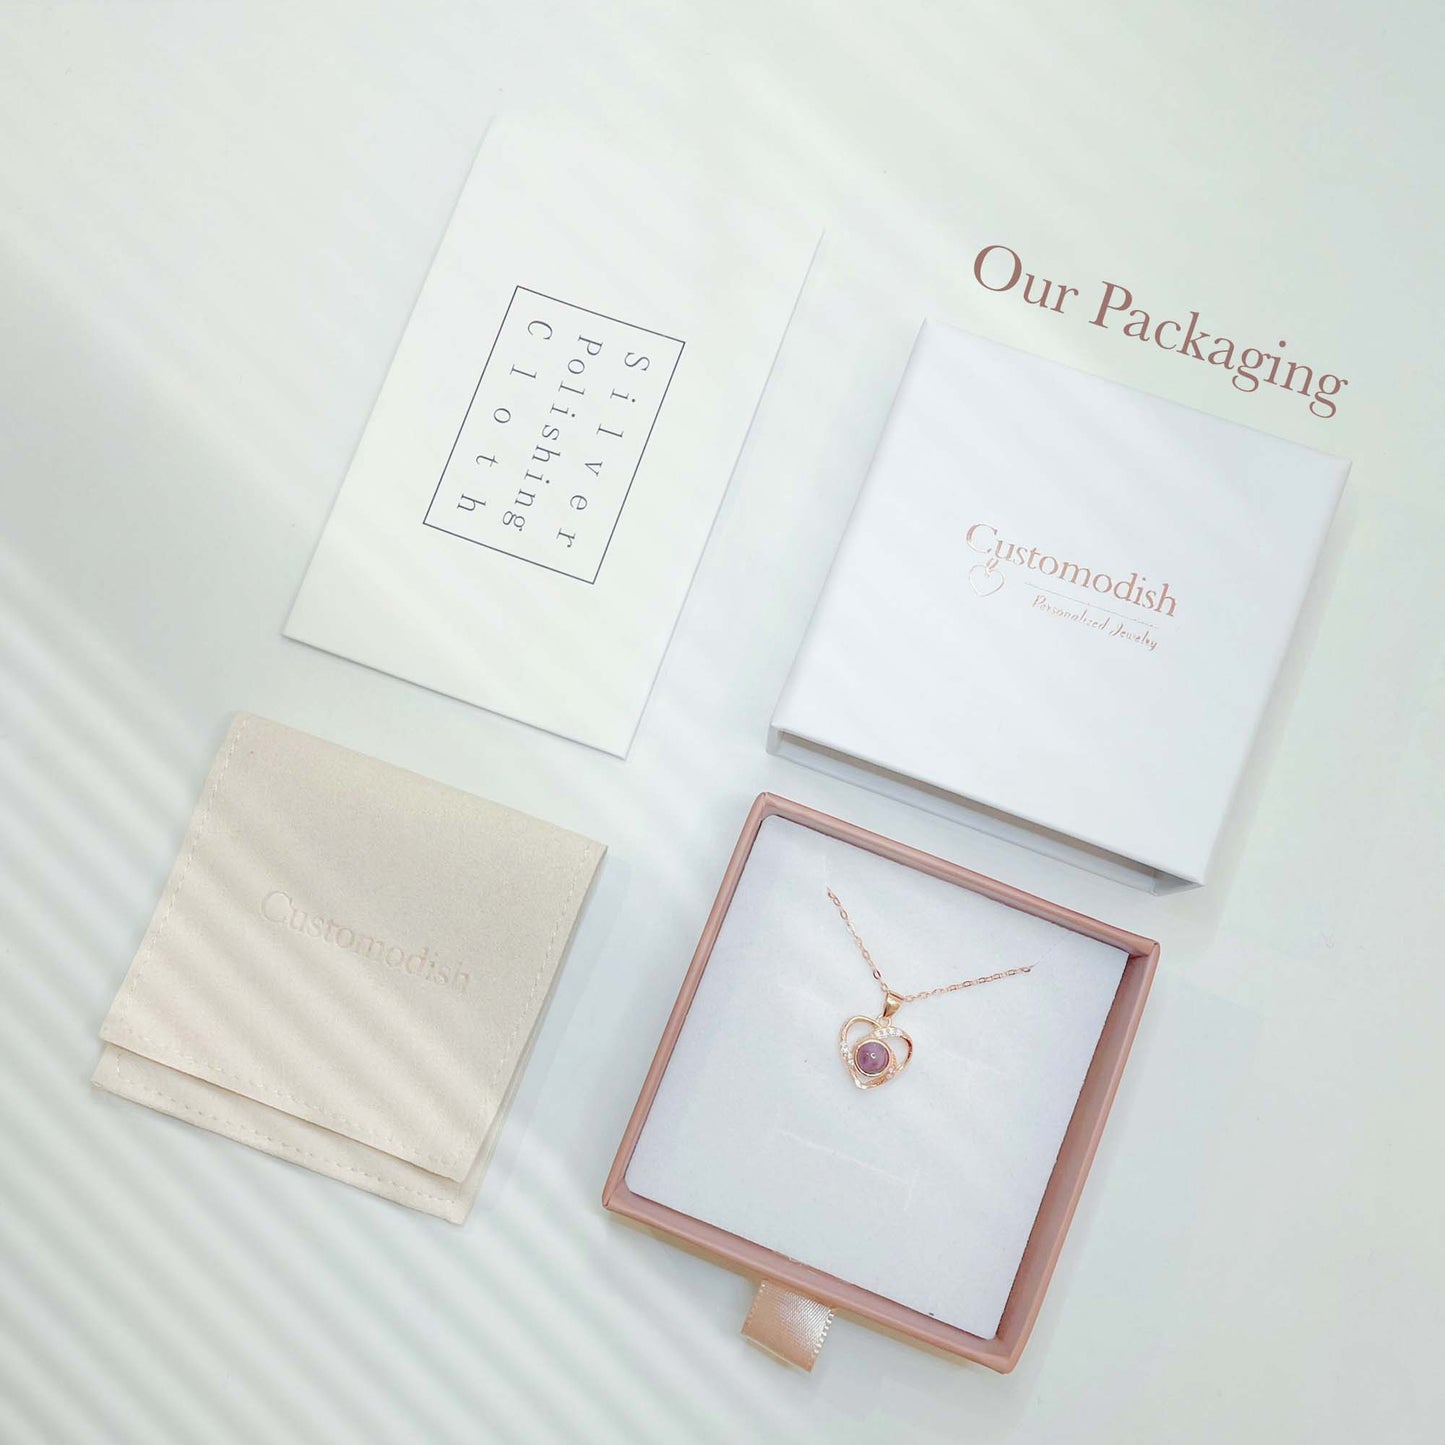 Customodish offers free gift box for our photo projection jewelry. Shop now!